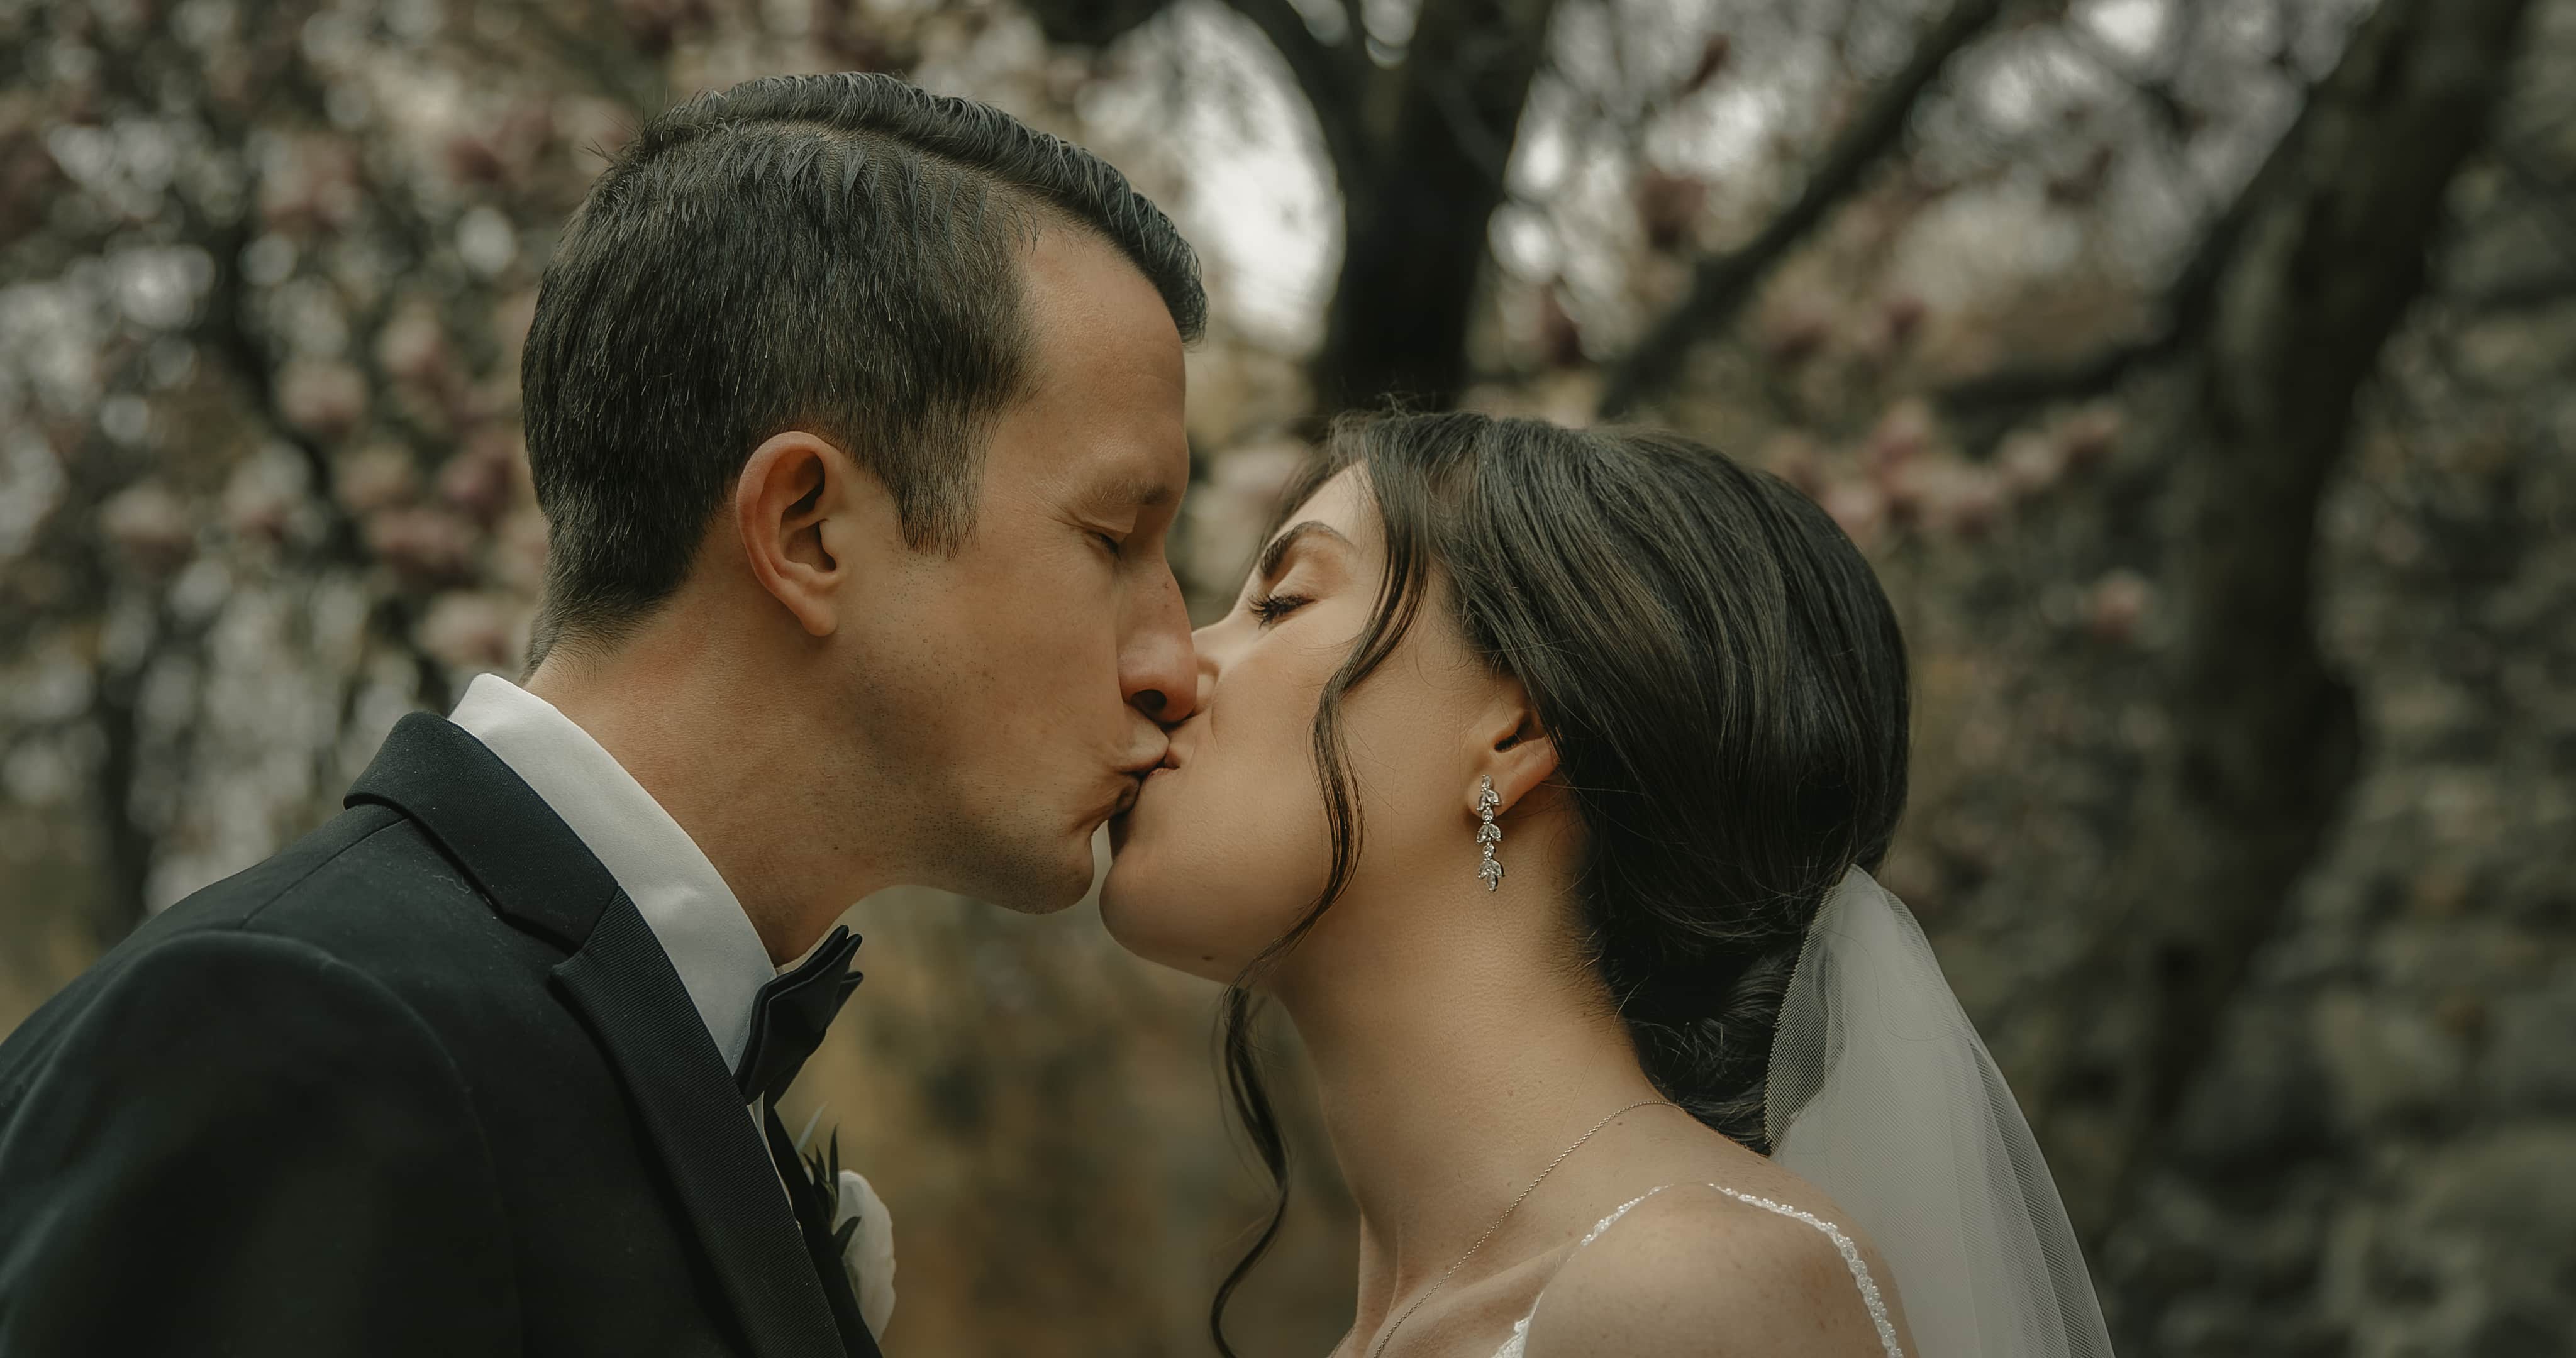 Megan and Tims The Grandview Wedding Video in The Hudson Valley Poughkeepsie